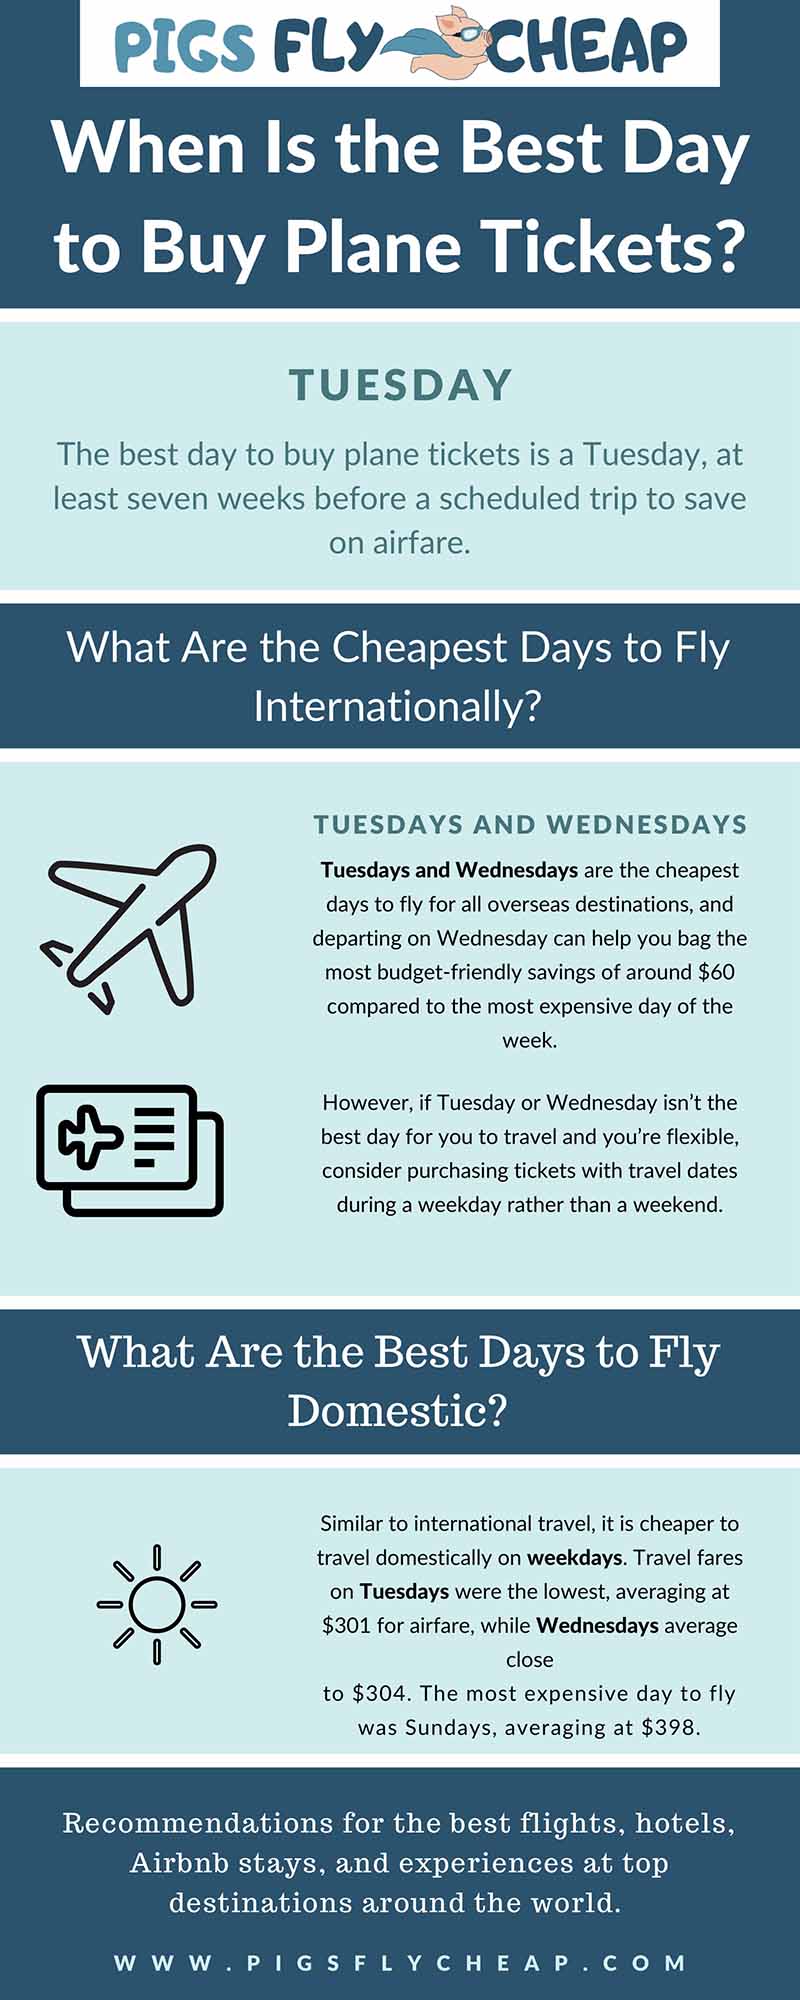 When Is the Best Day to Buy Plane Tickets? Pigs Fly Cheap